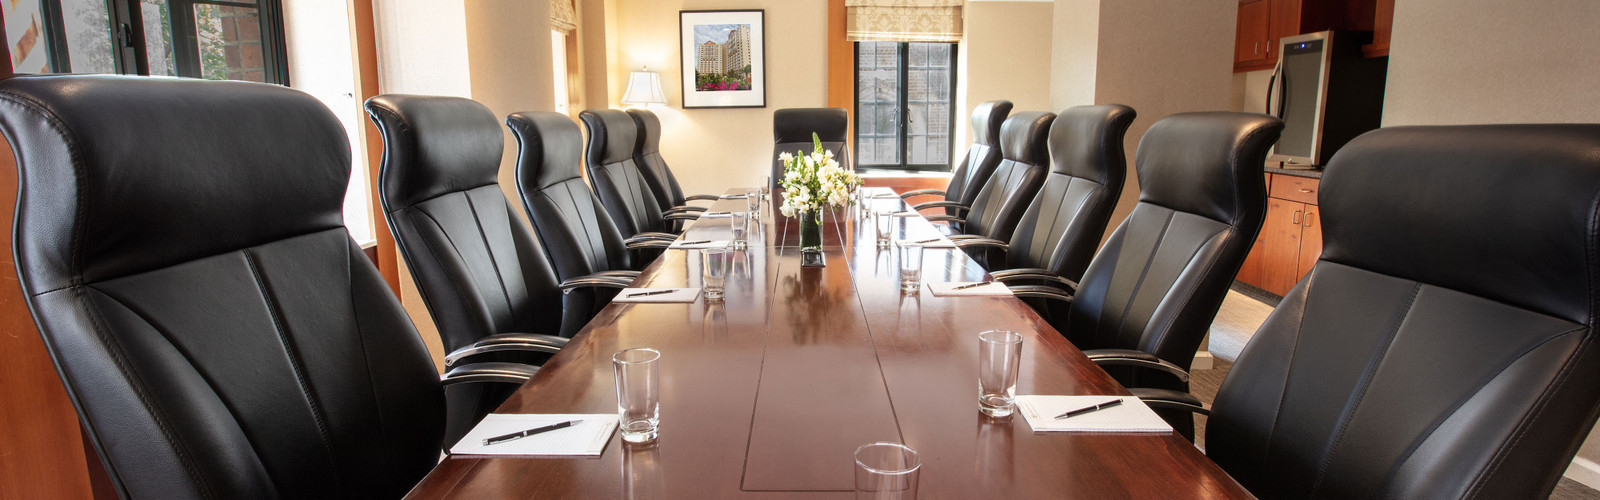 NYC Meeting Board Rooms | Westgate New York Grand Central